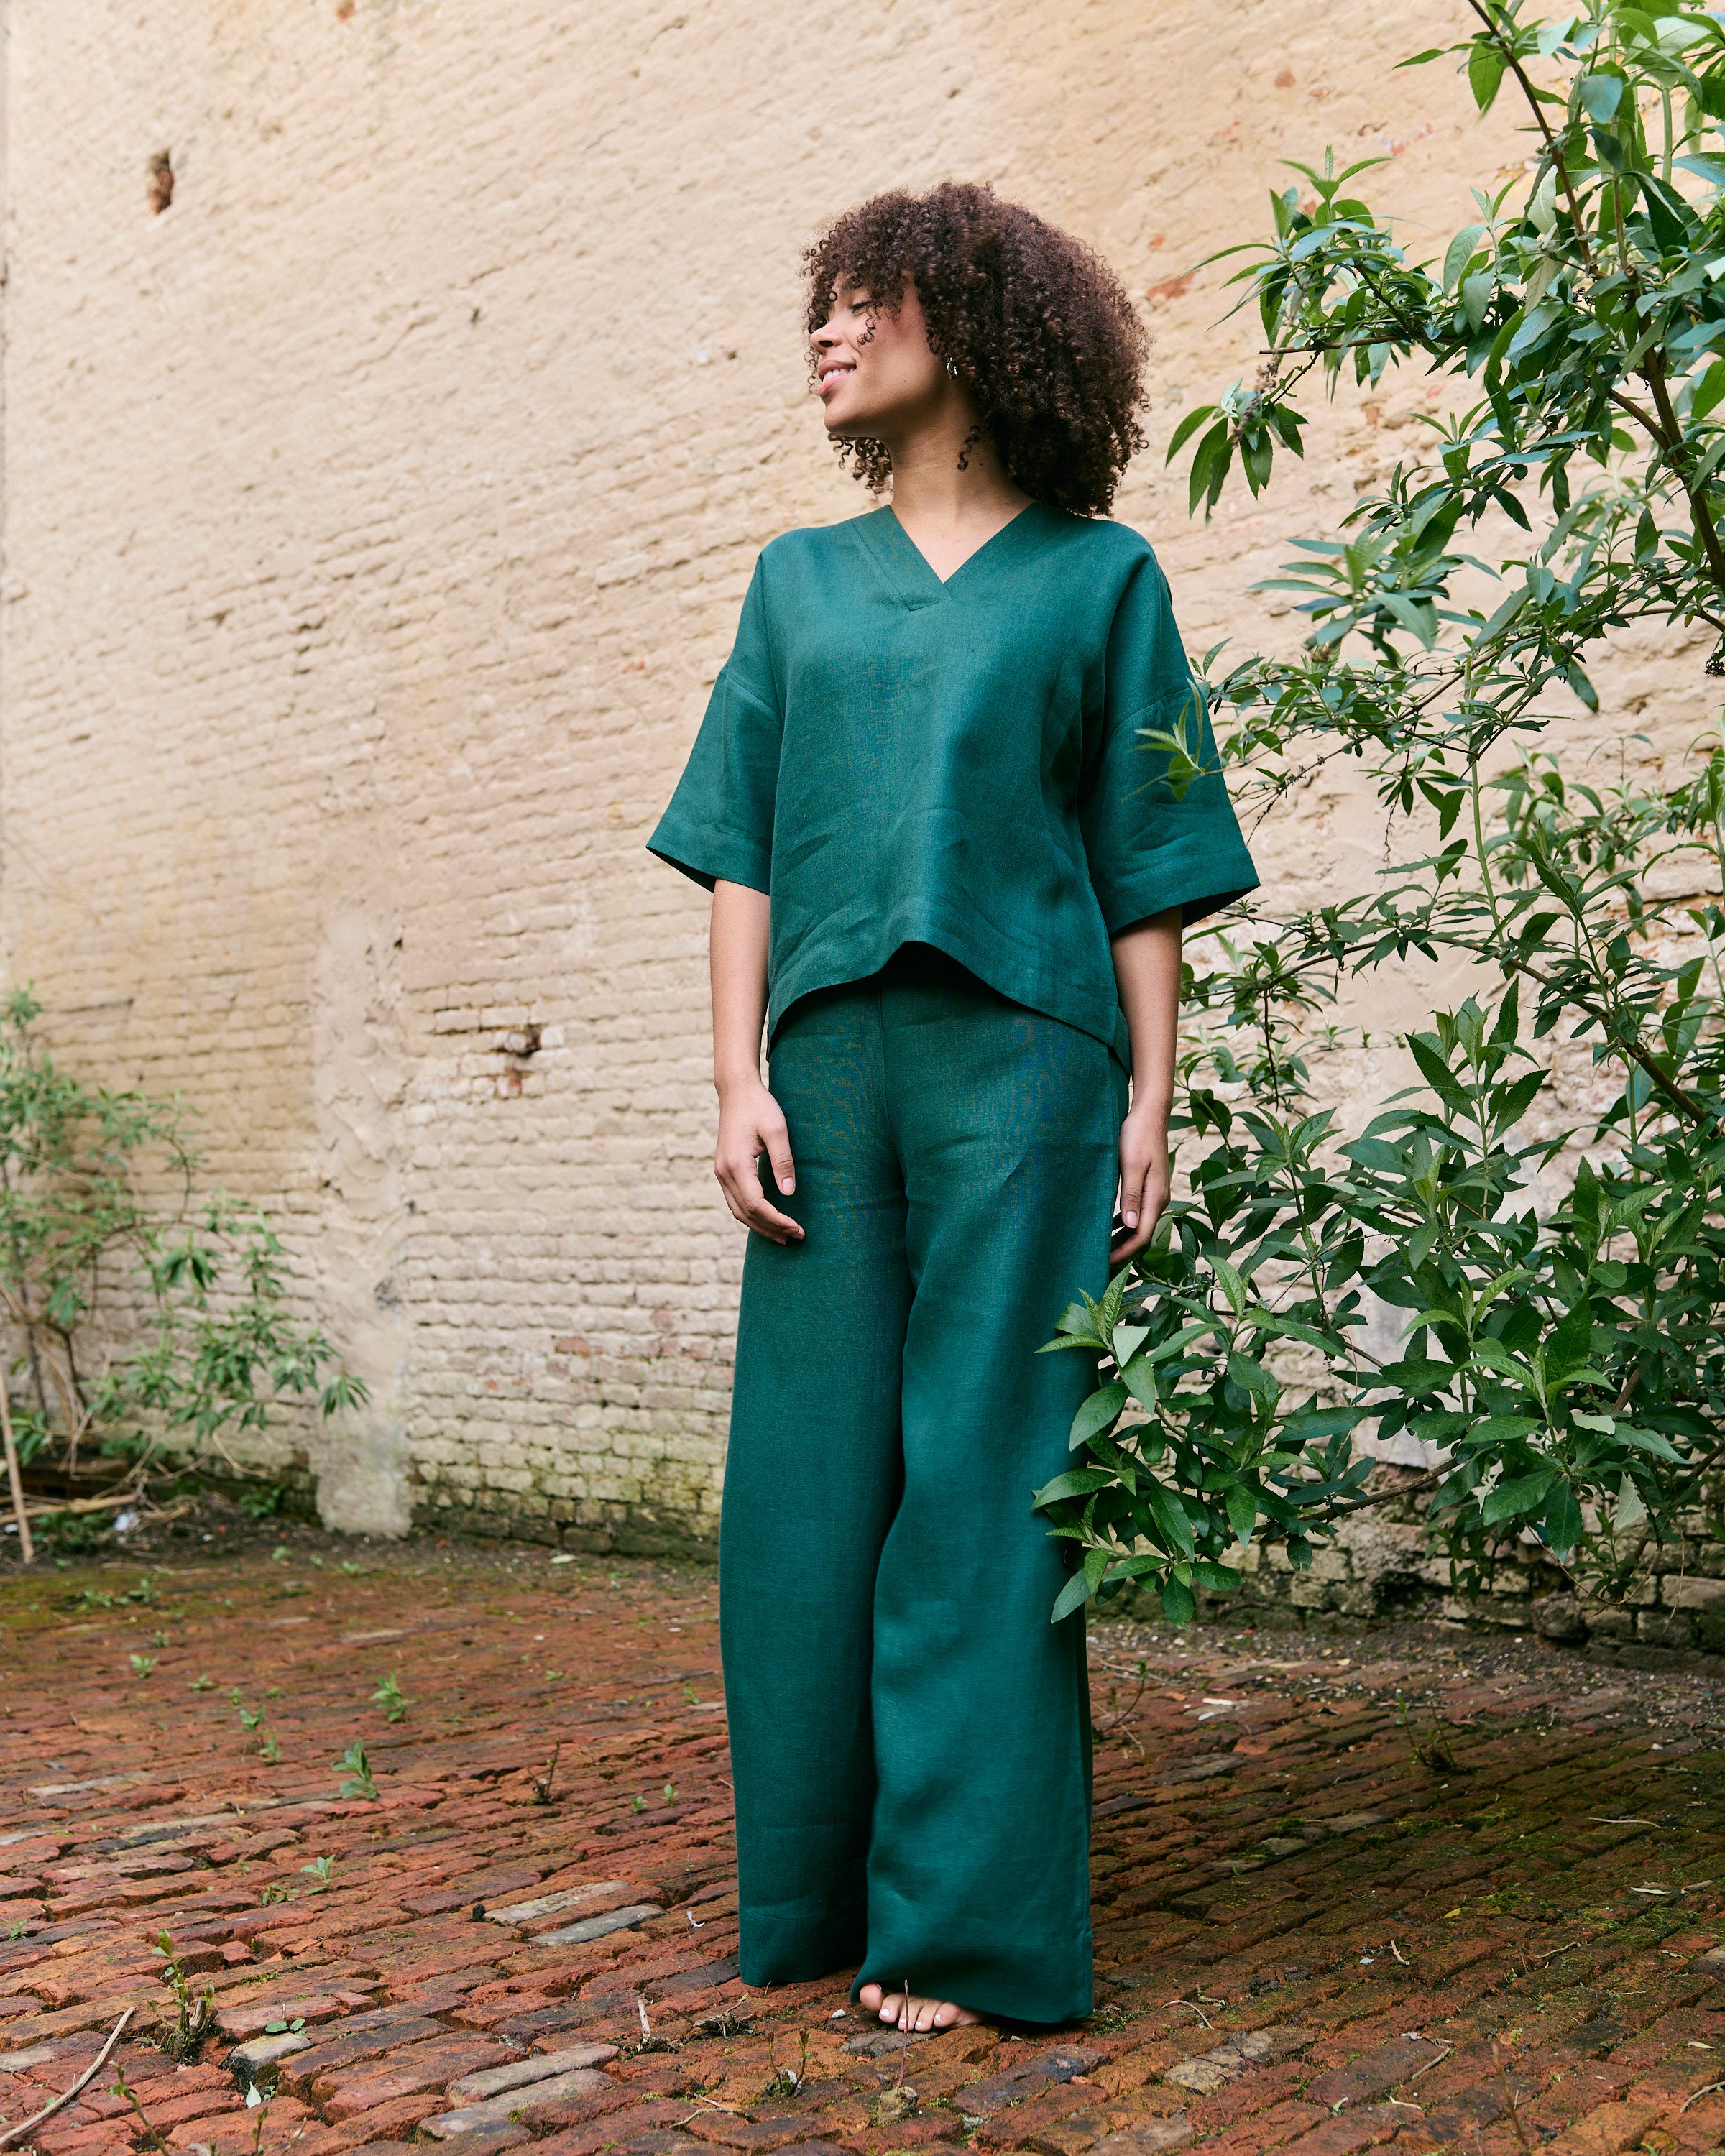 Comfortable green linen trousers and top made from 100% Belgian linen.